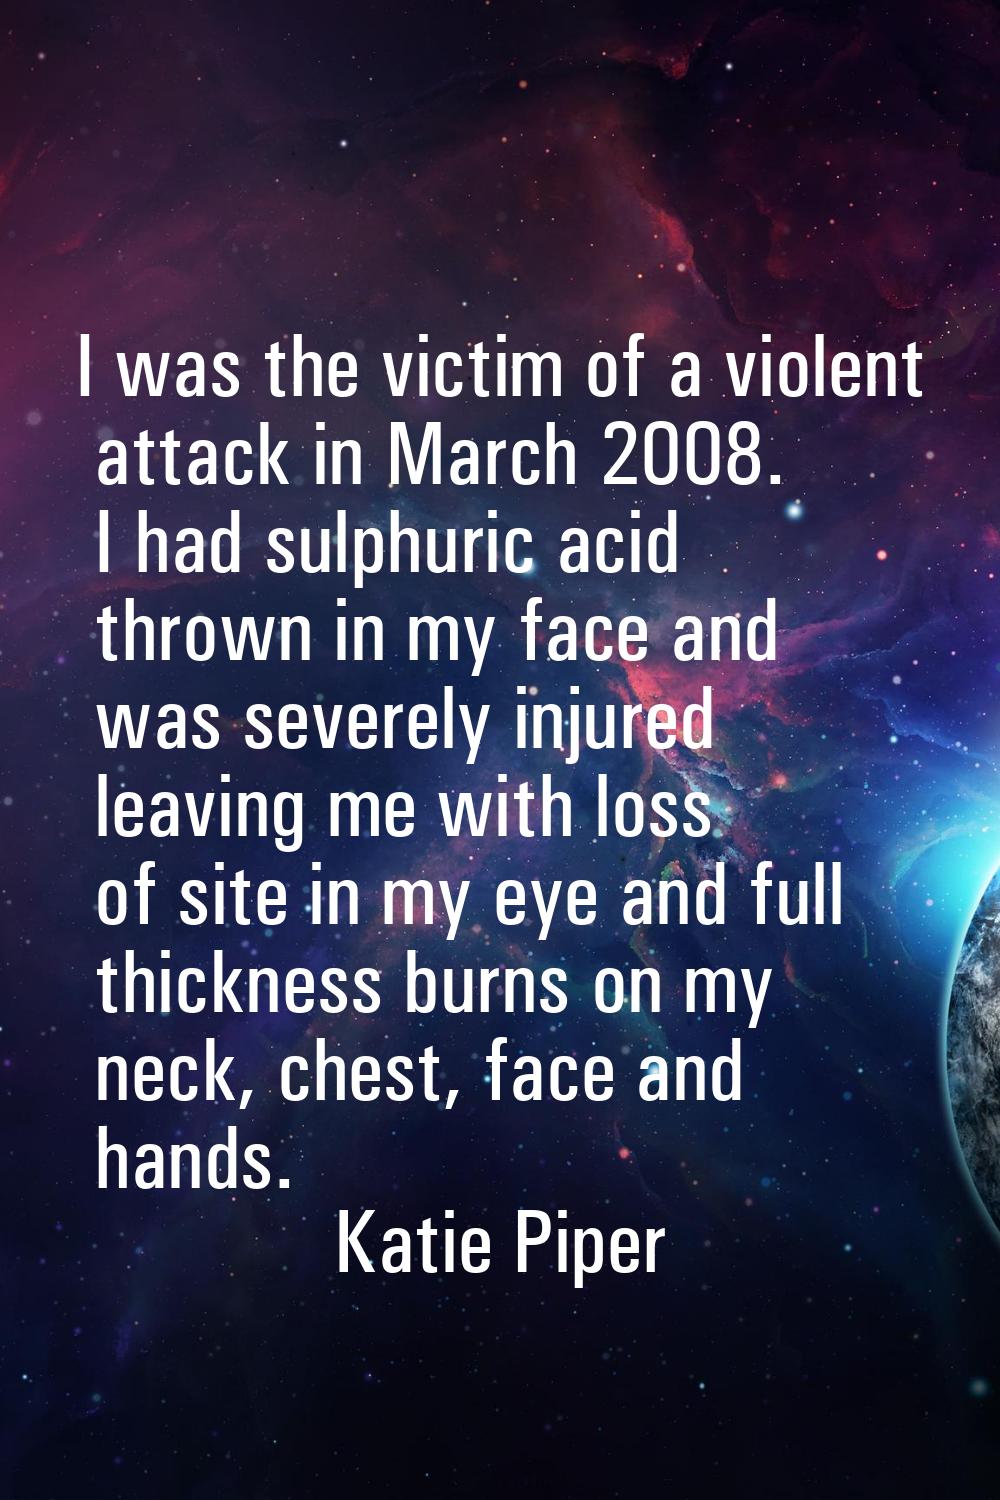 I was the victim of a violent attack in March 2008. I had sulphuric acid thrown in my face and was 